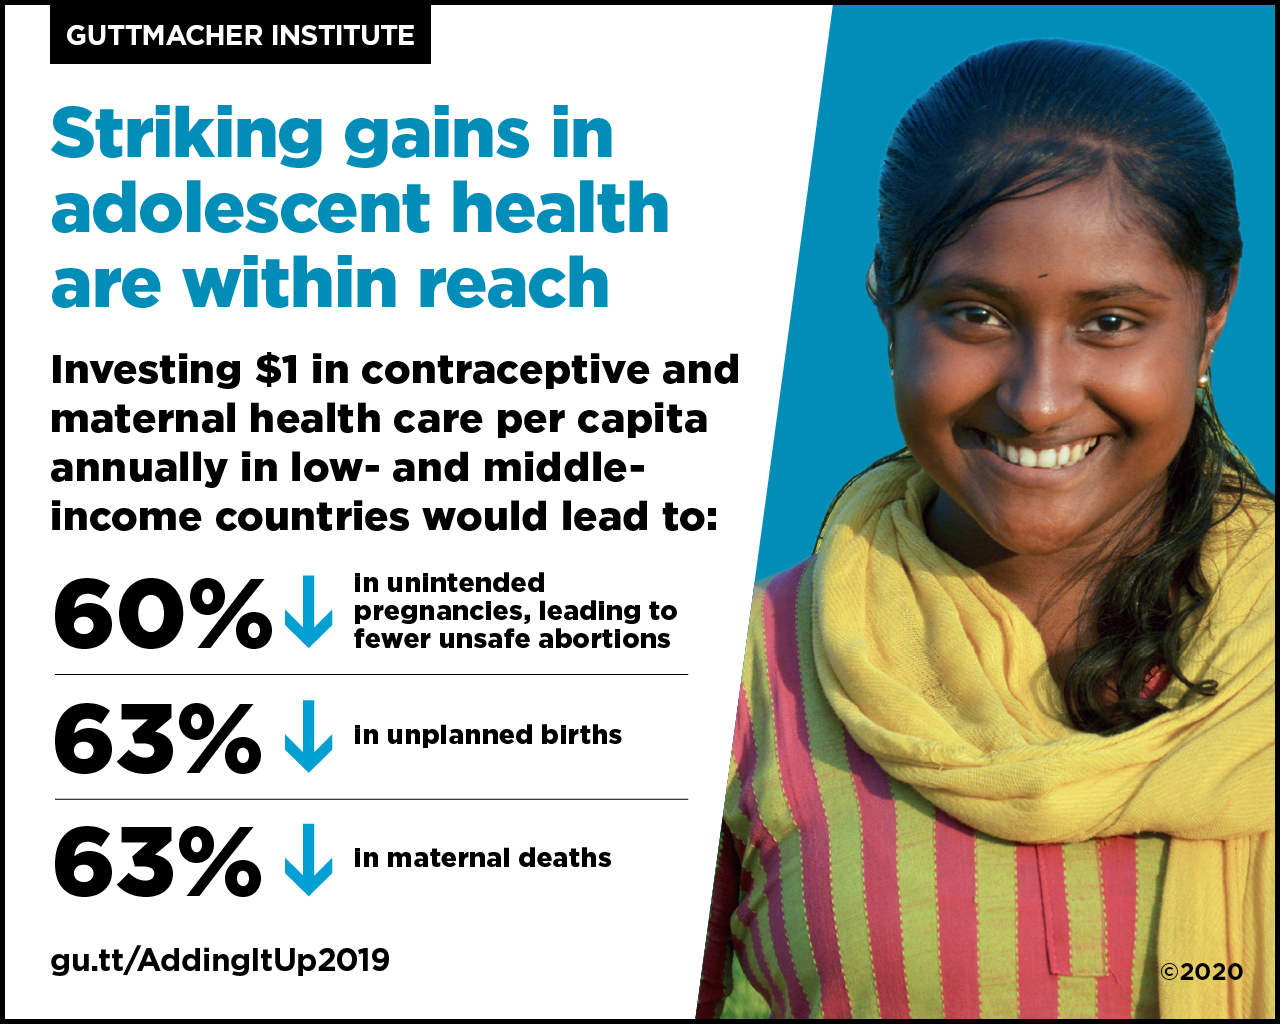 Striking gains in adolescent health are within reach